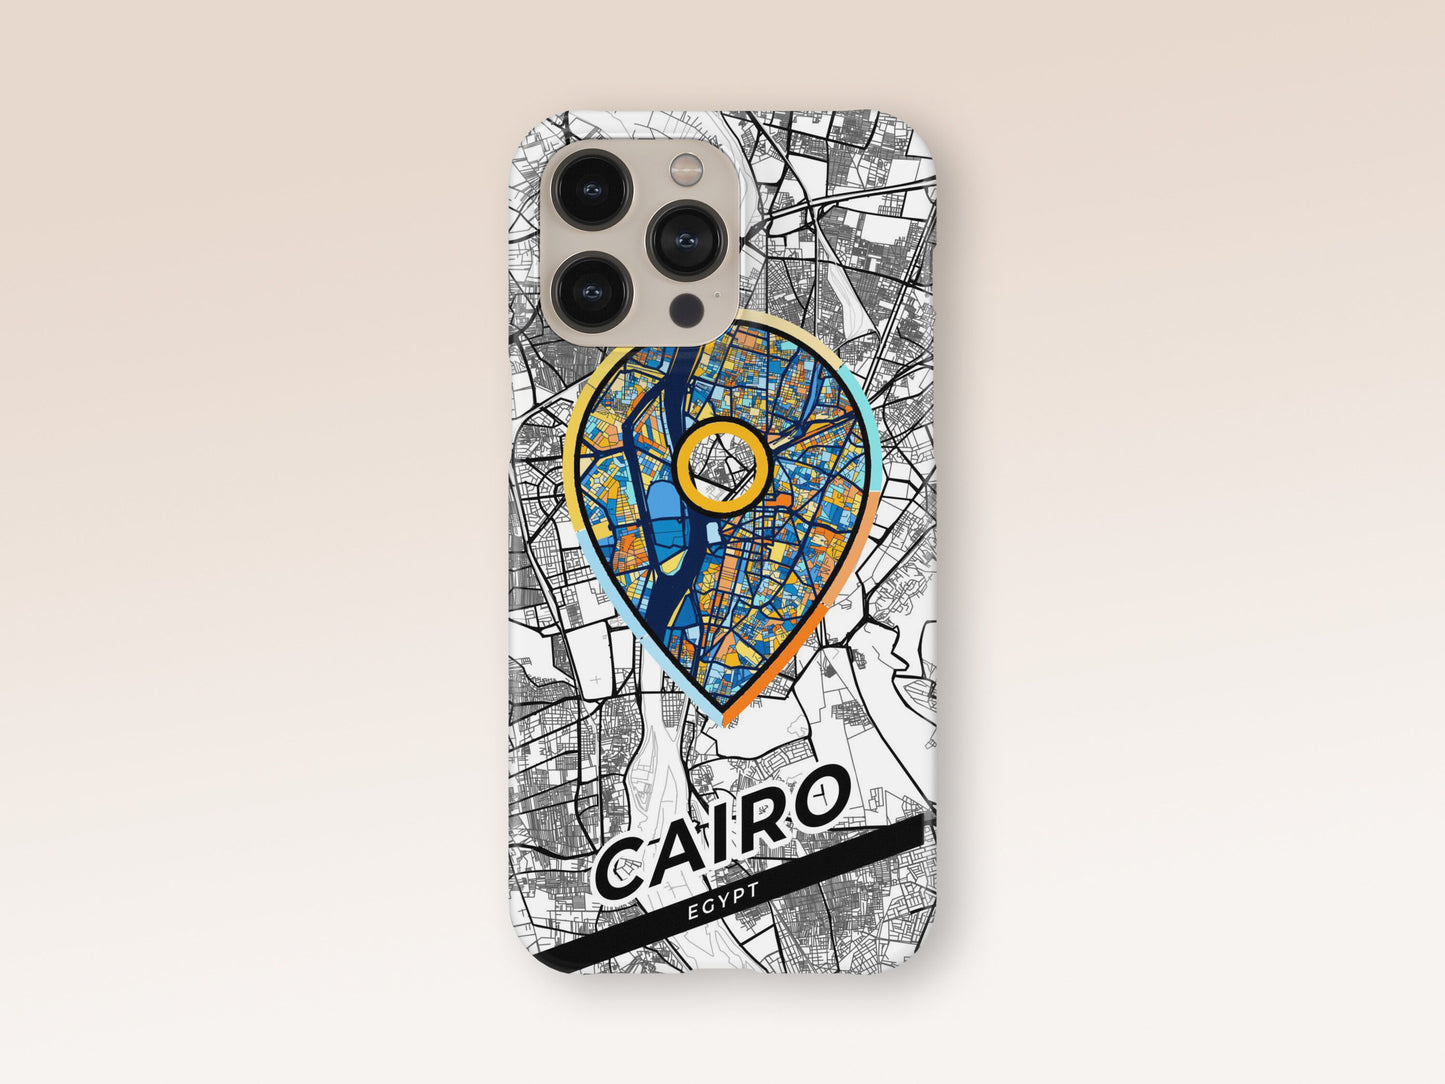 Cairo Egypt slim phone case with colorful icon. Birthday, wedding or housewarming gift. Couple match cases. 1